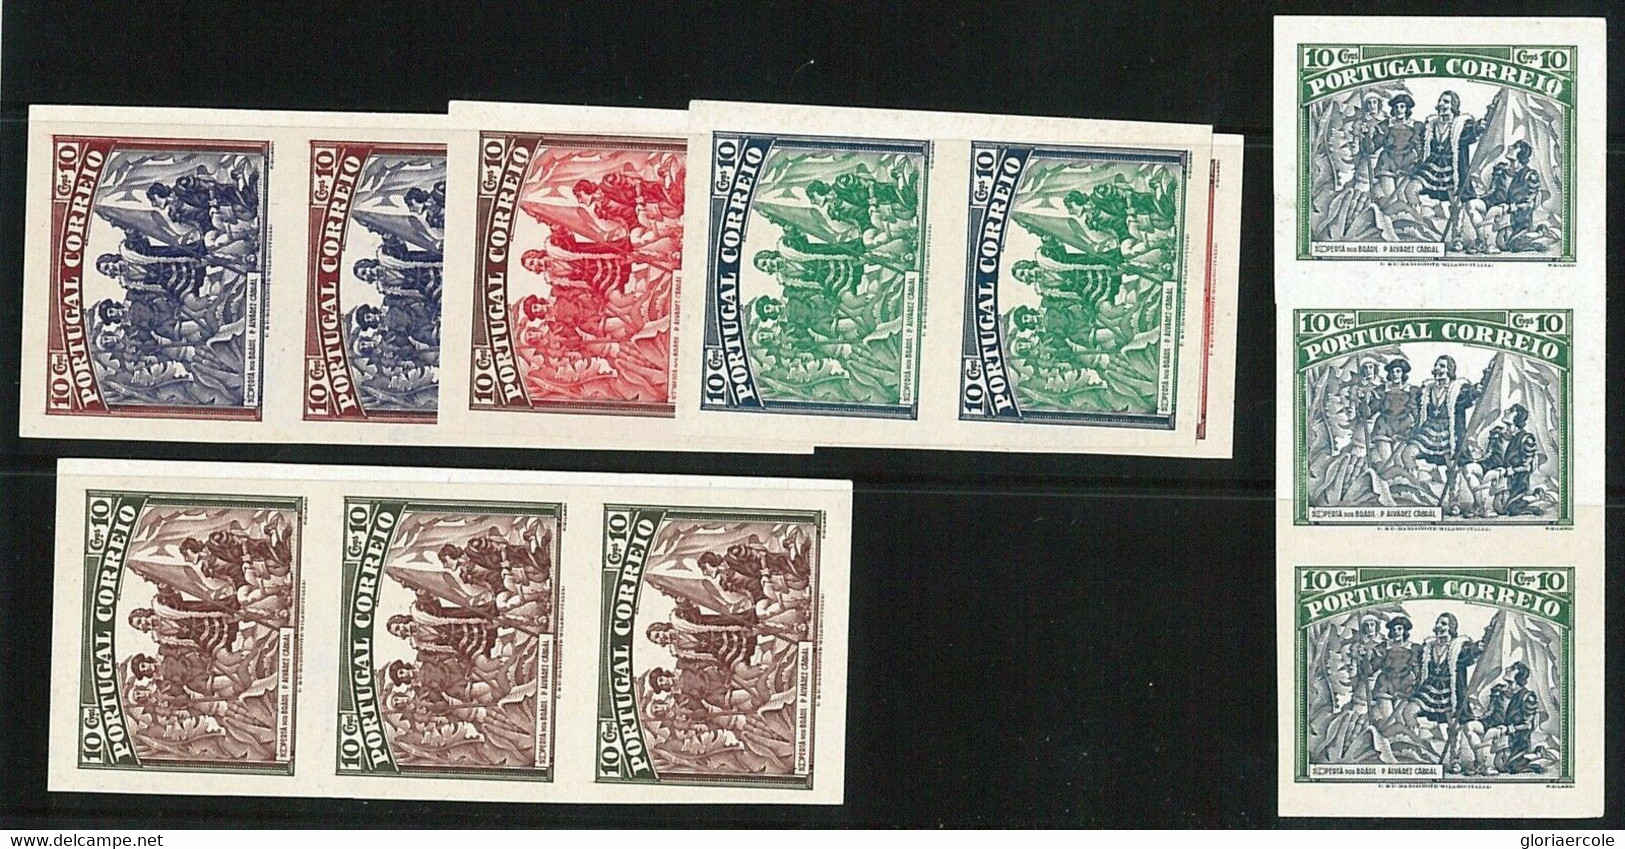 46485 - Cabral PORTUGAL - UNISSUED Never Issued STAMP PROOFS!  VERY INTERESTING! 1940 - Probe- Und Nachdrucke